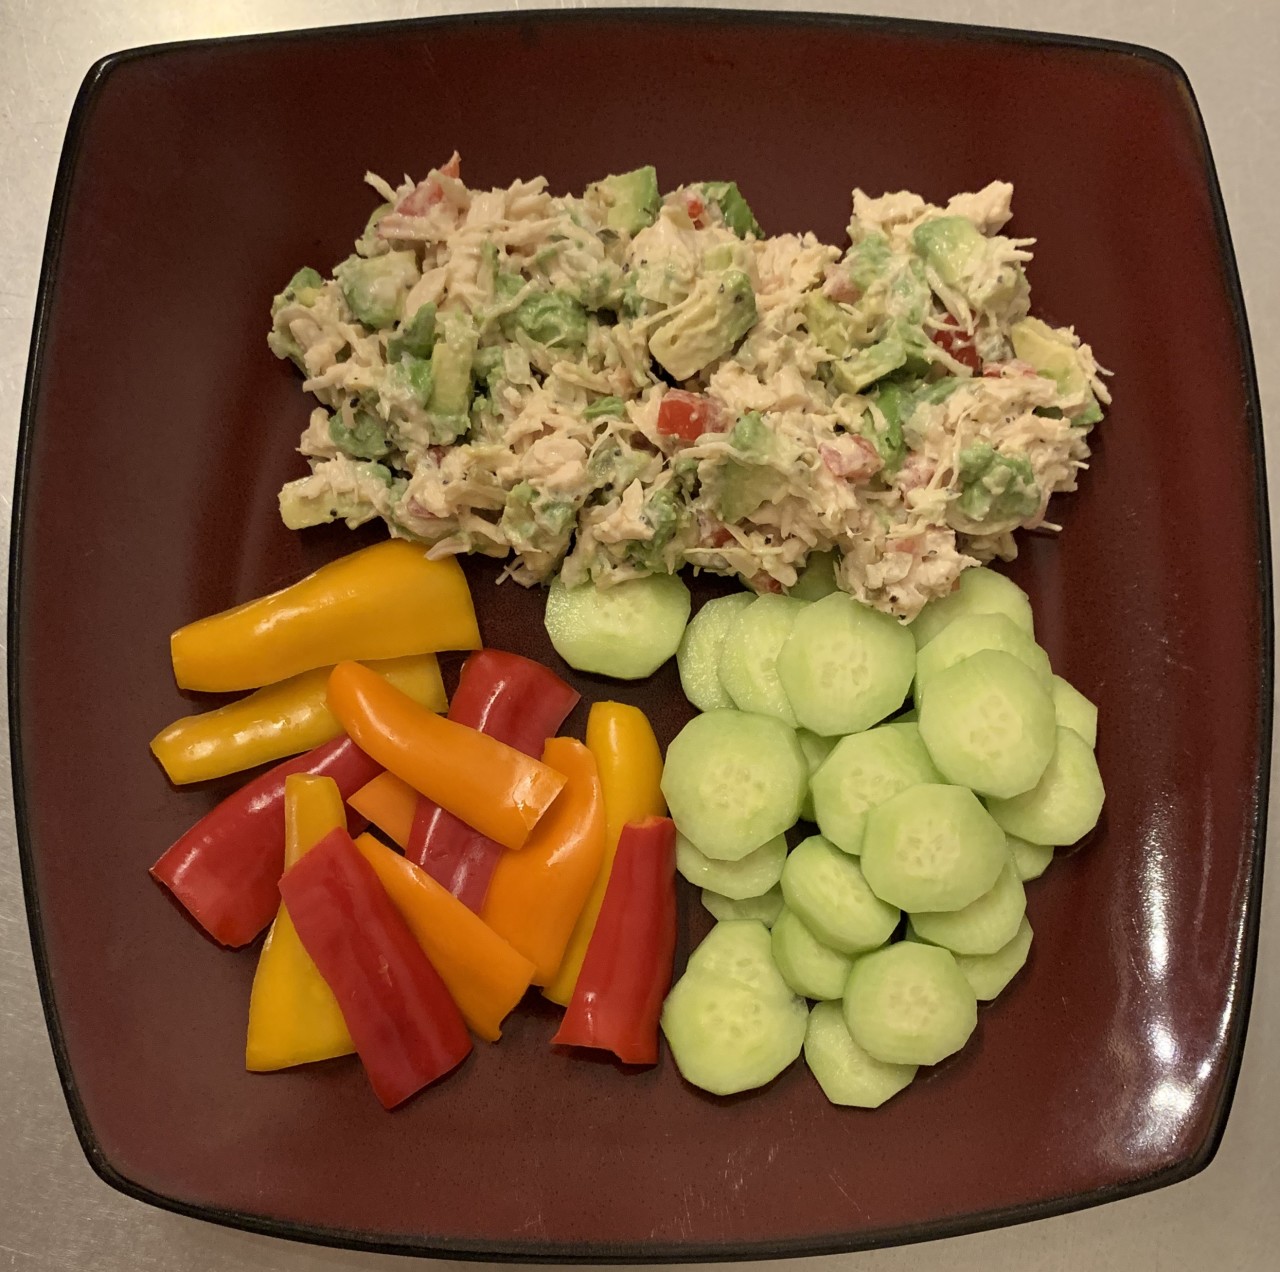 <a class="bx-tag" rel="tag" href="https://streetloc.com/view-channel-profile/whatsforlunch"><s>#</s><b>whatsforlunch</b></a> Chicken Avocado Salad, with Cucumber and Sweet Peppers